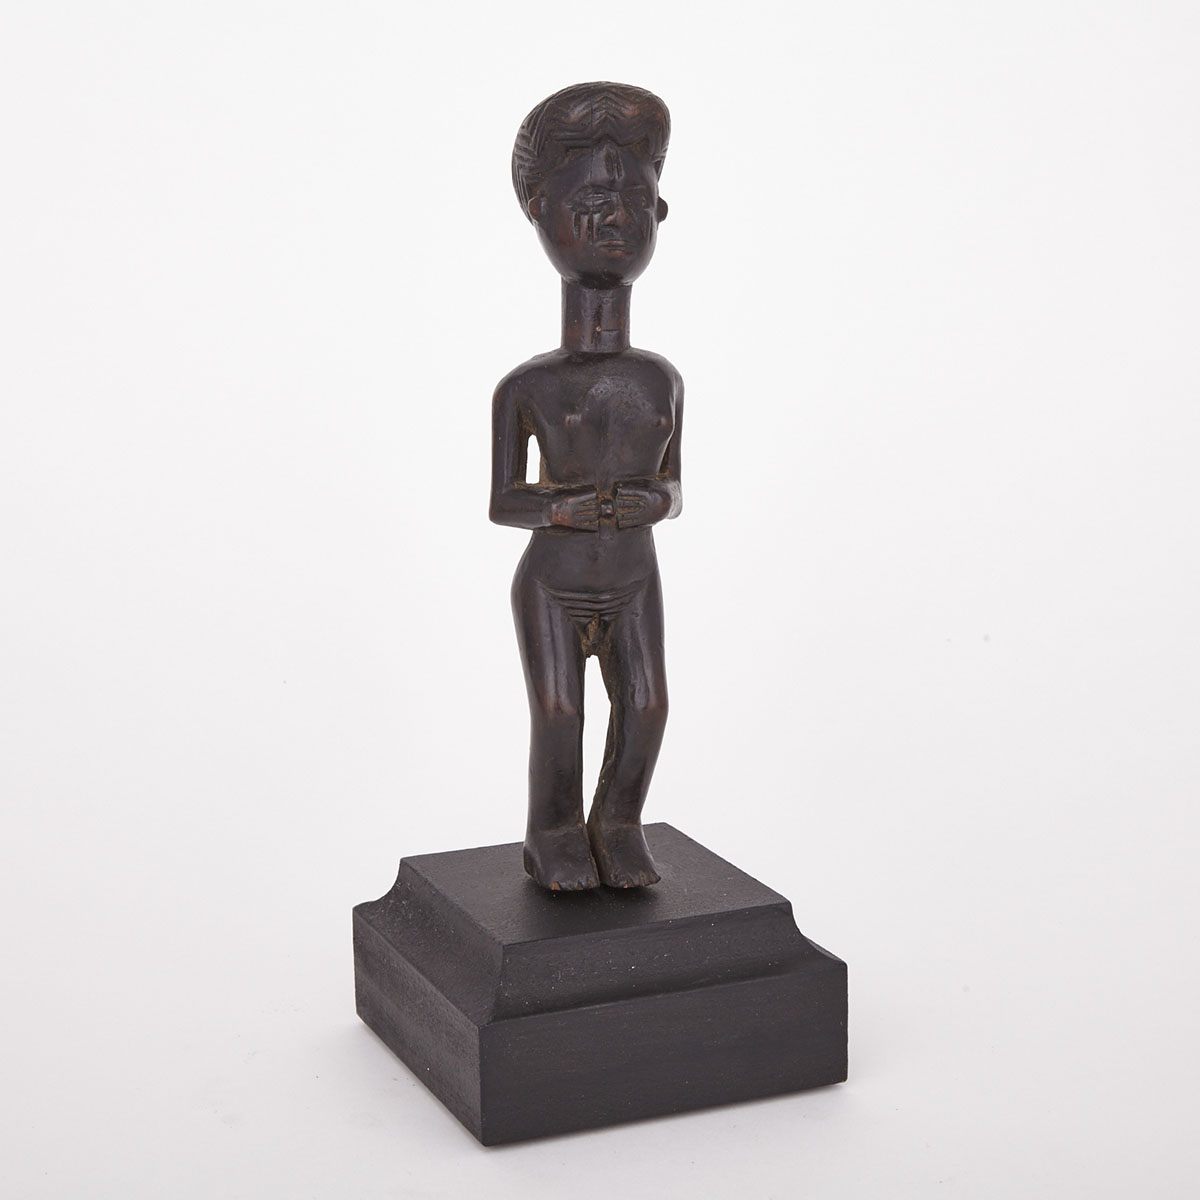 Chokwe Carved Wood Female Figure, Central Africa, 20th century